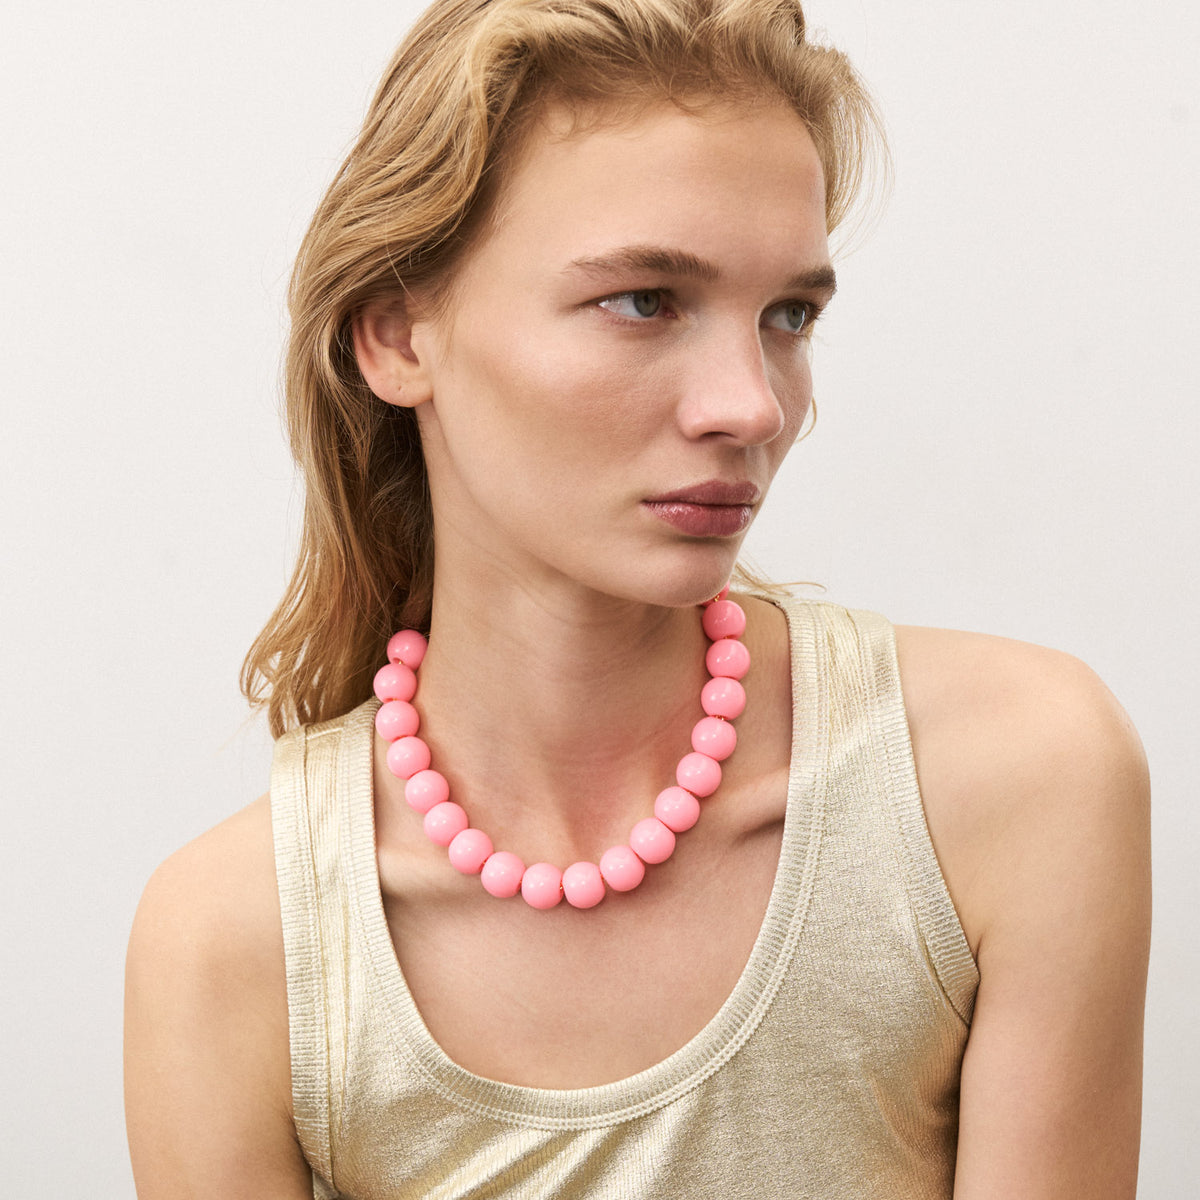 Small Beads Necklace Short Bubble Gum